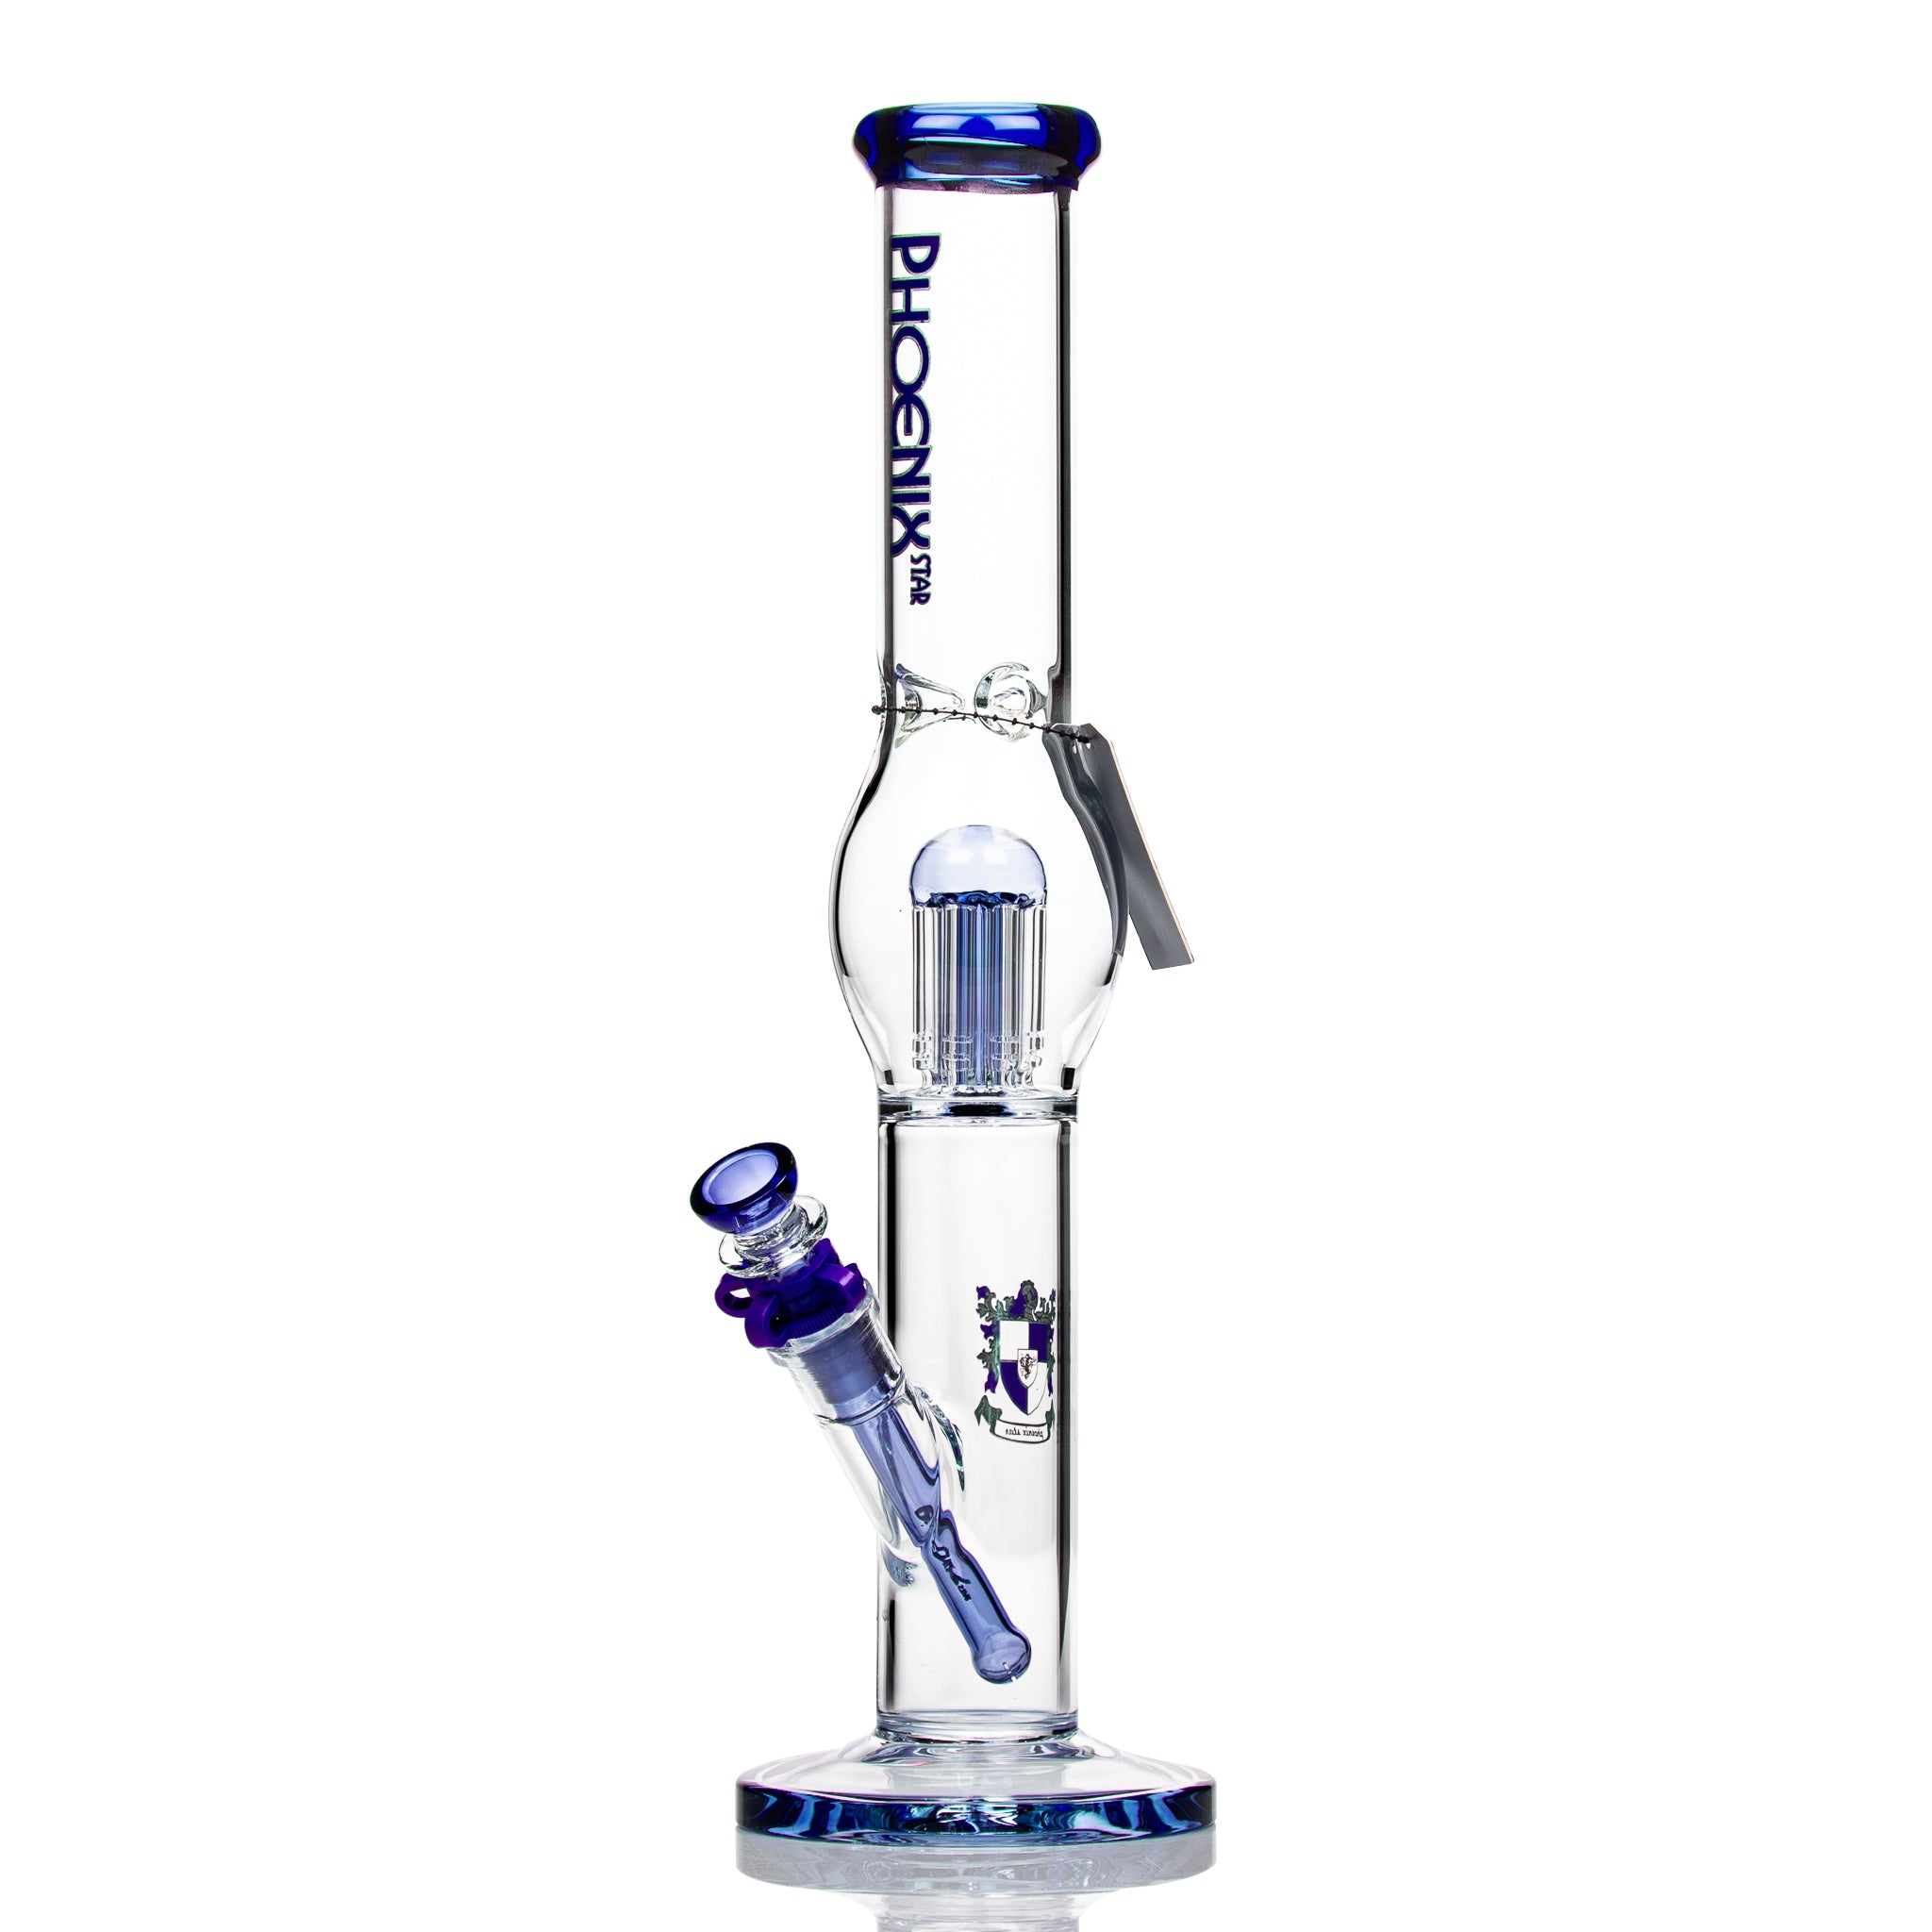 Phoenix 8 arm tree tube straight bong with coloured accents.